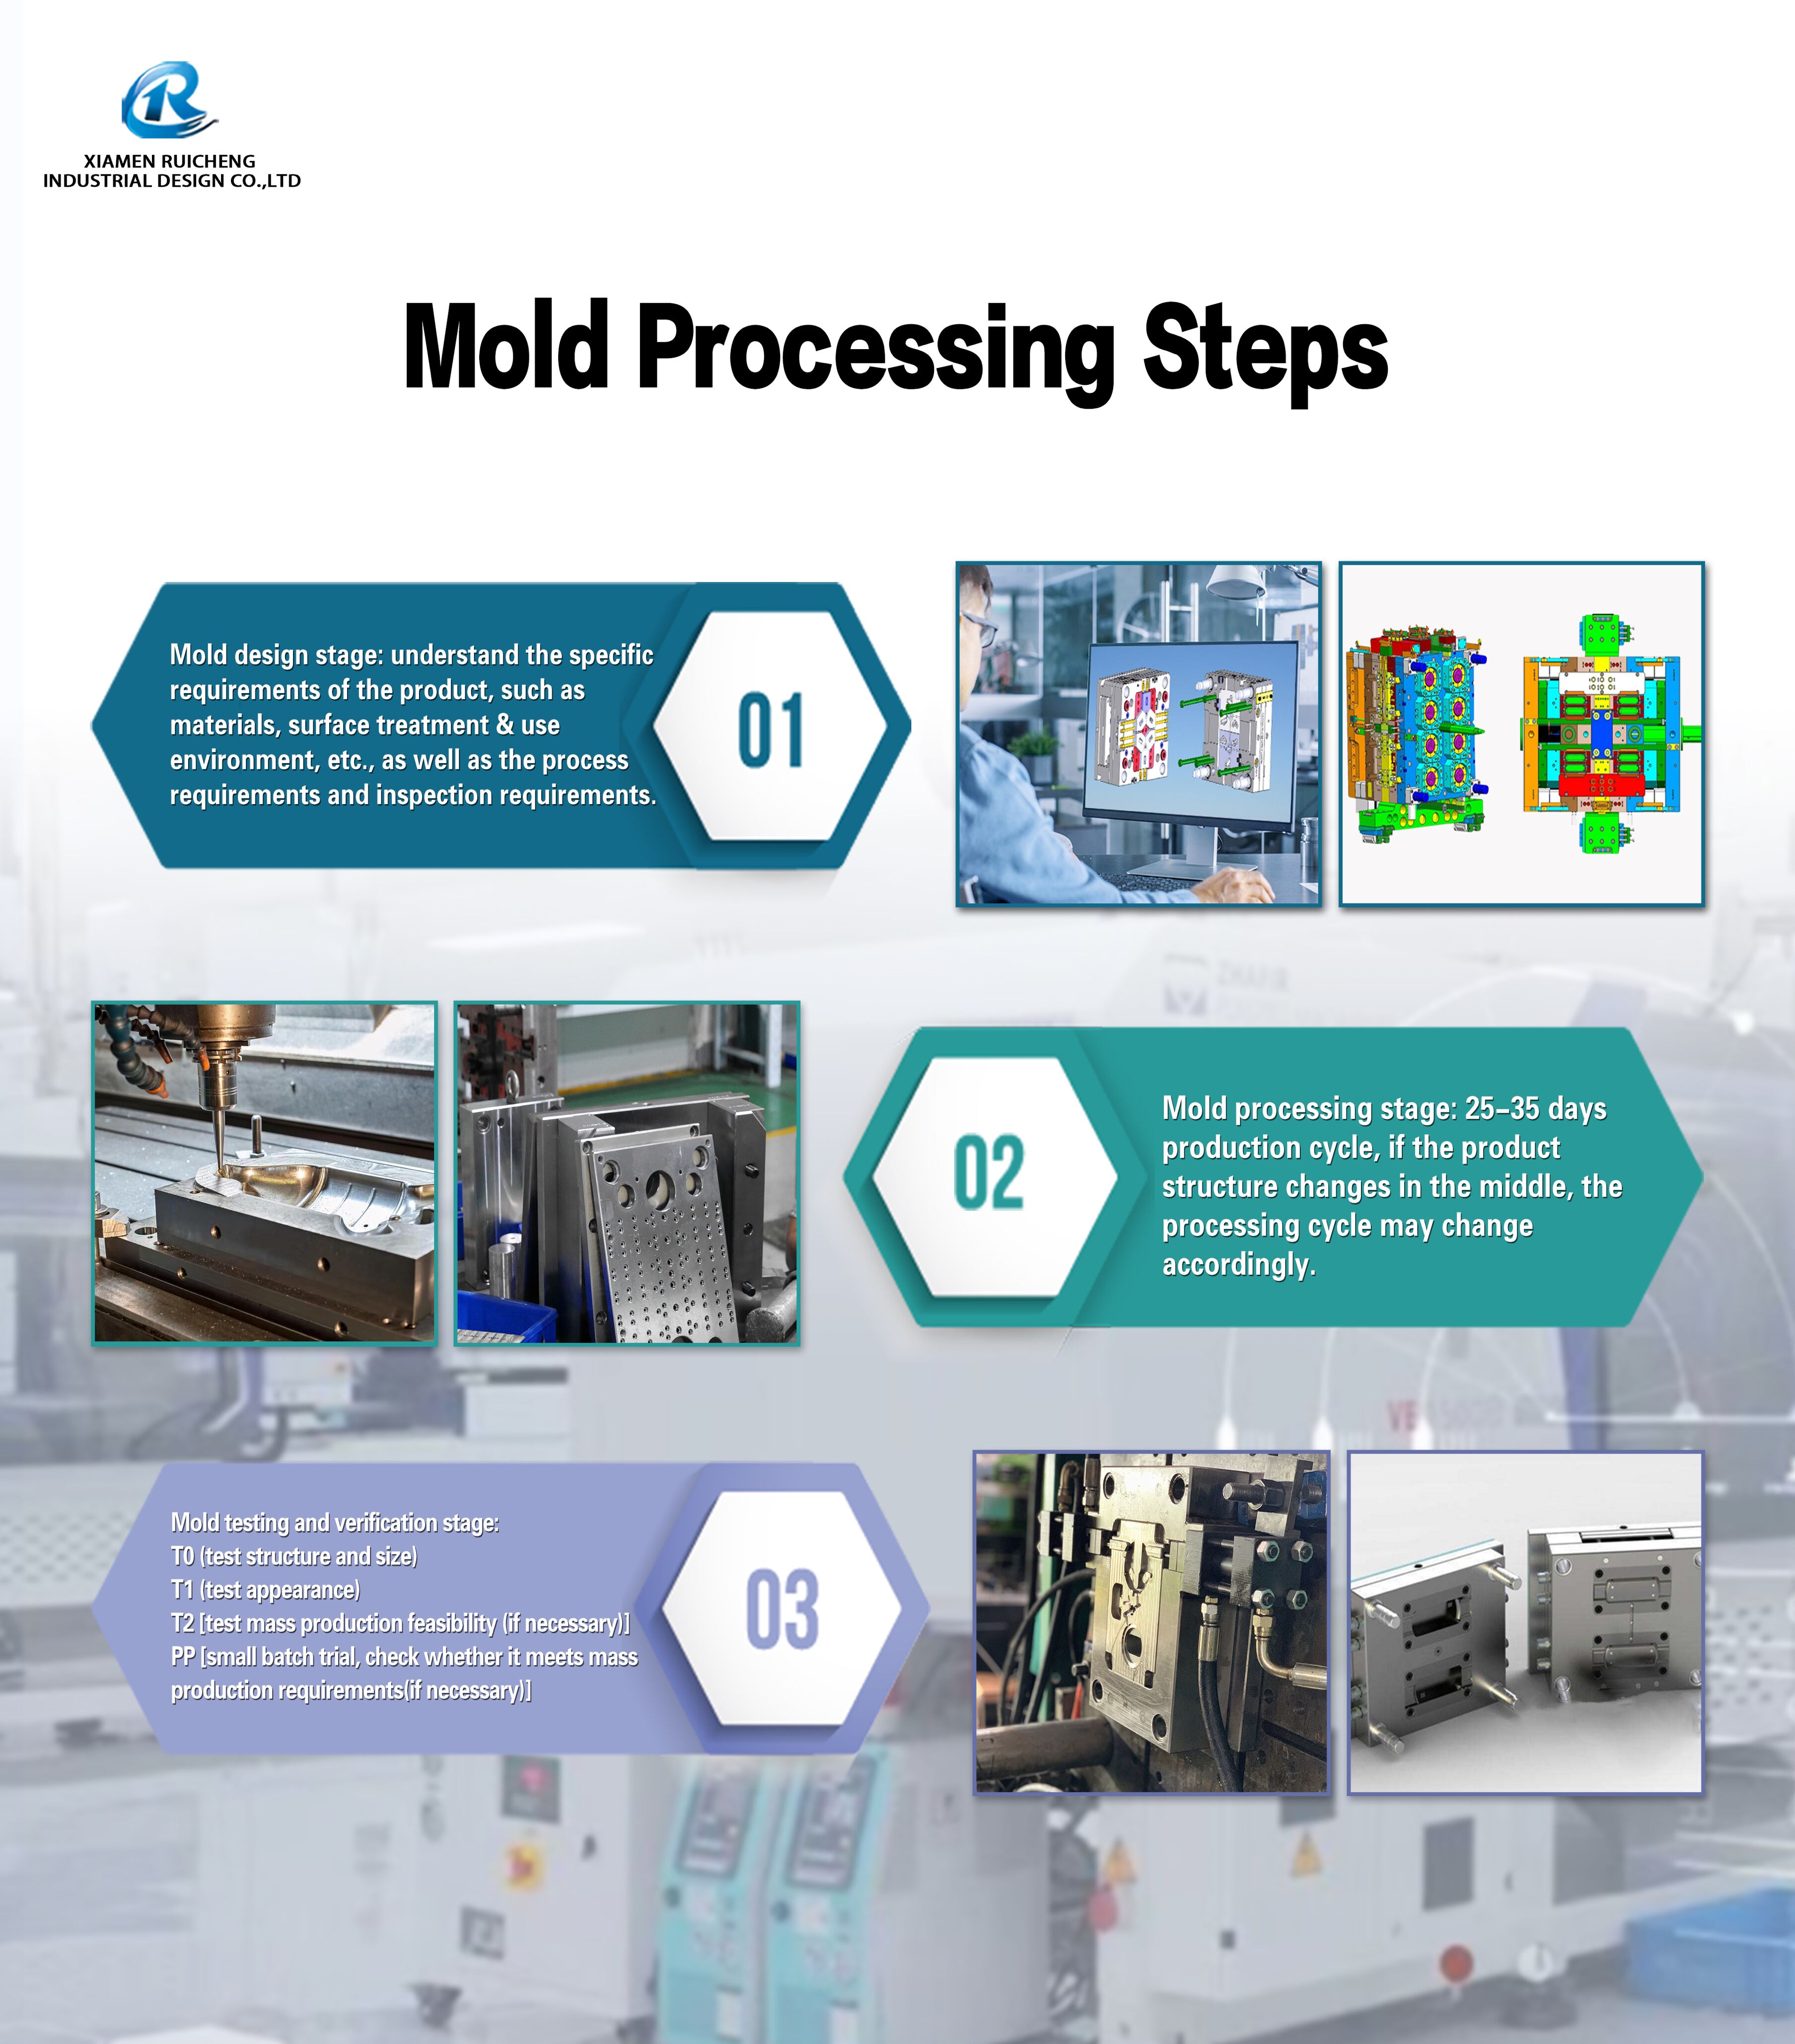 Mold Processing Steps